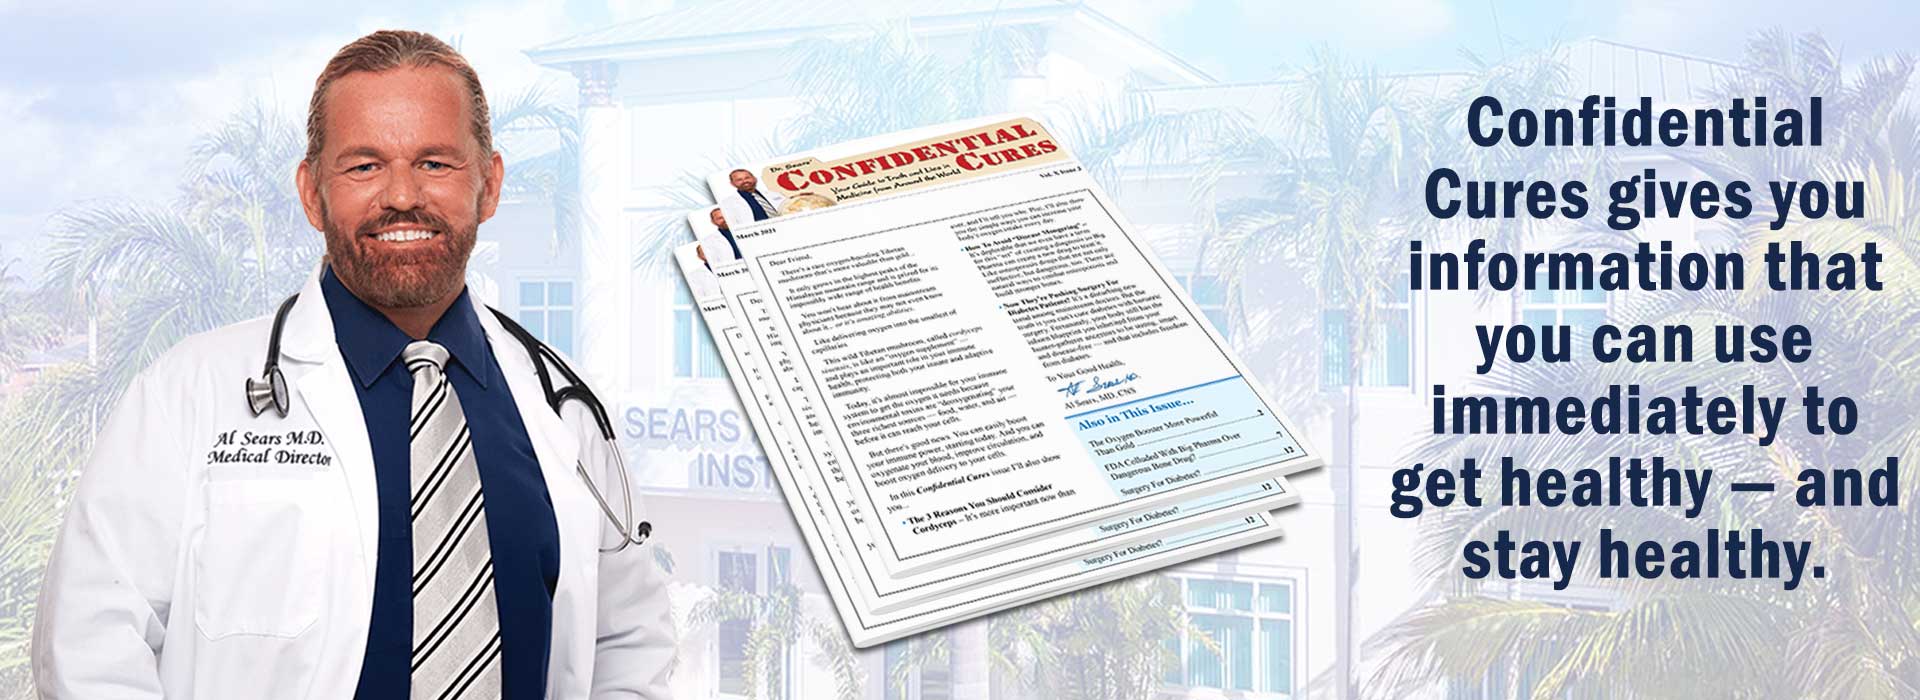 Subscribe to Confidential Cures Newsletter